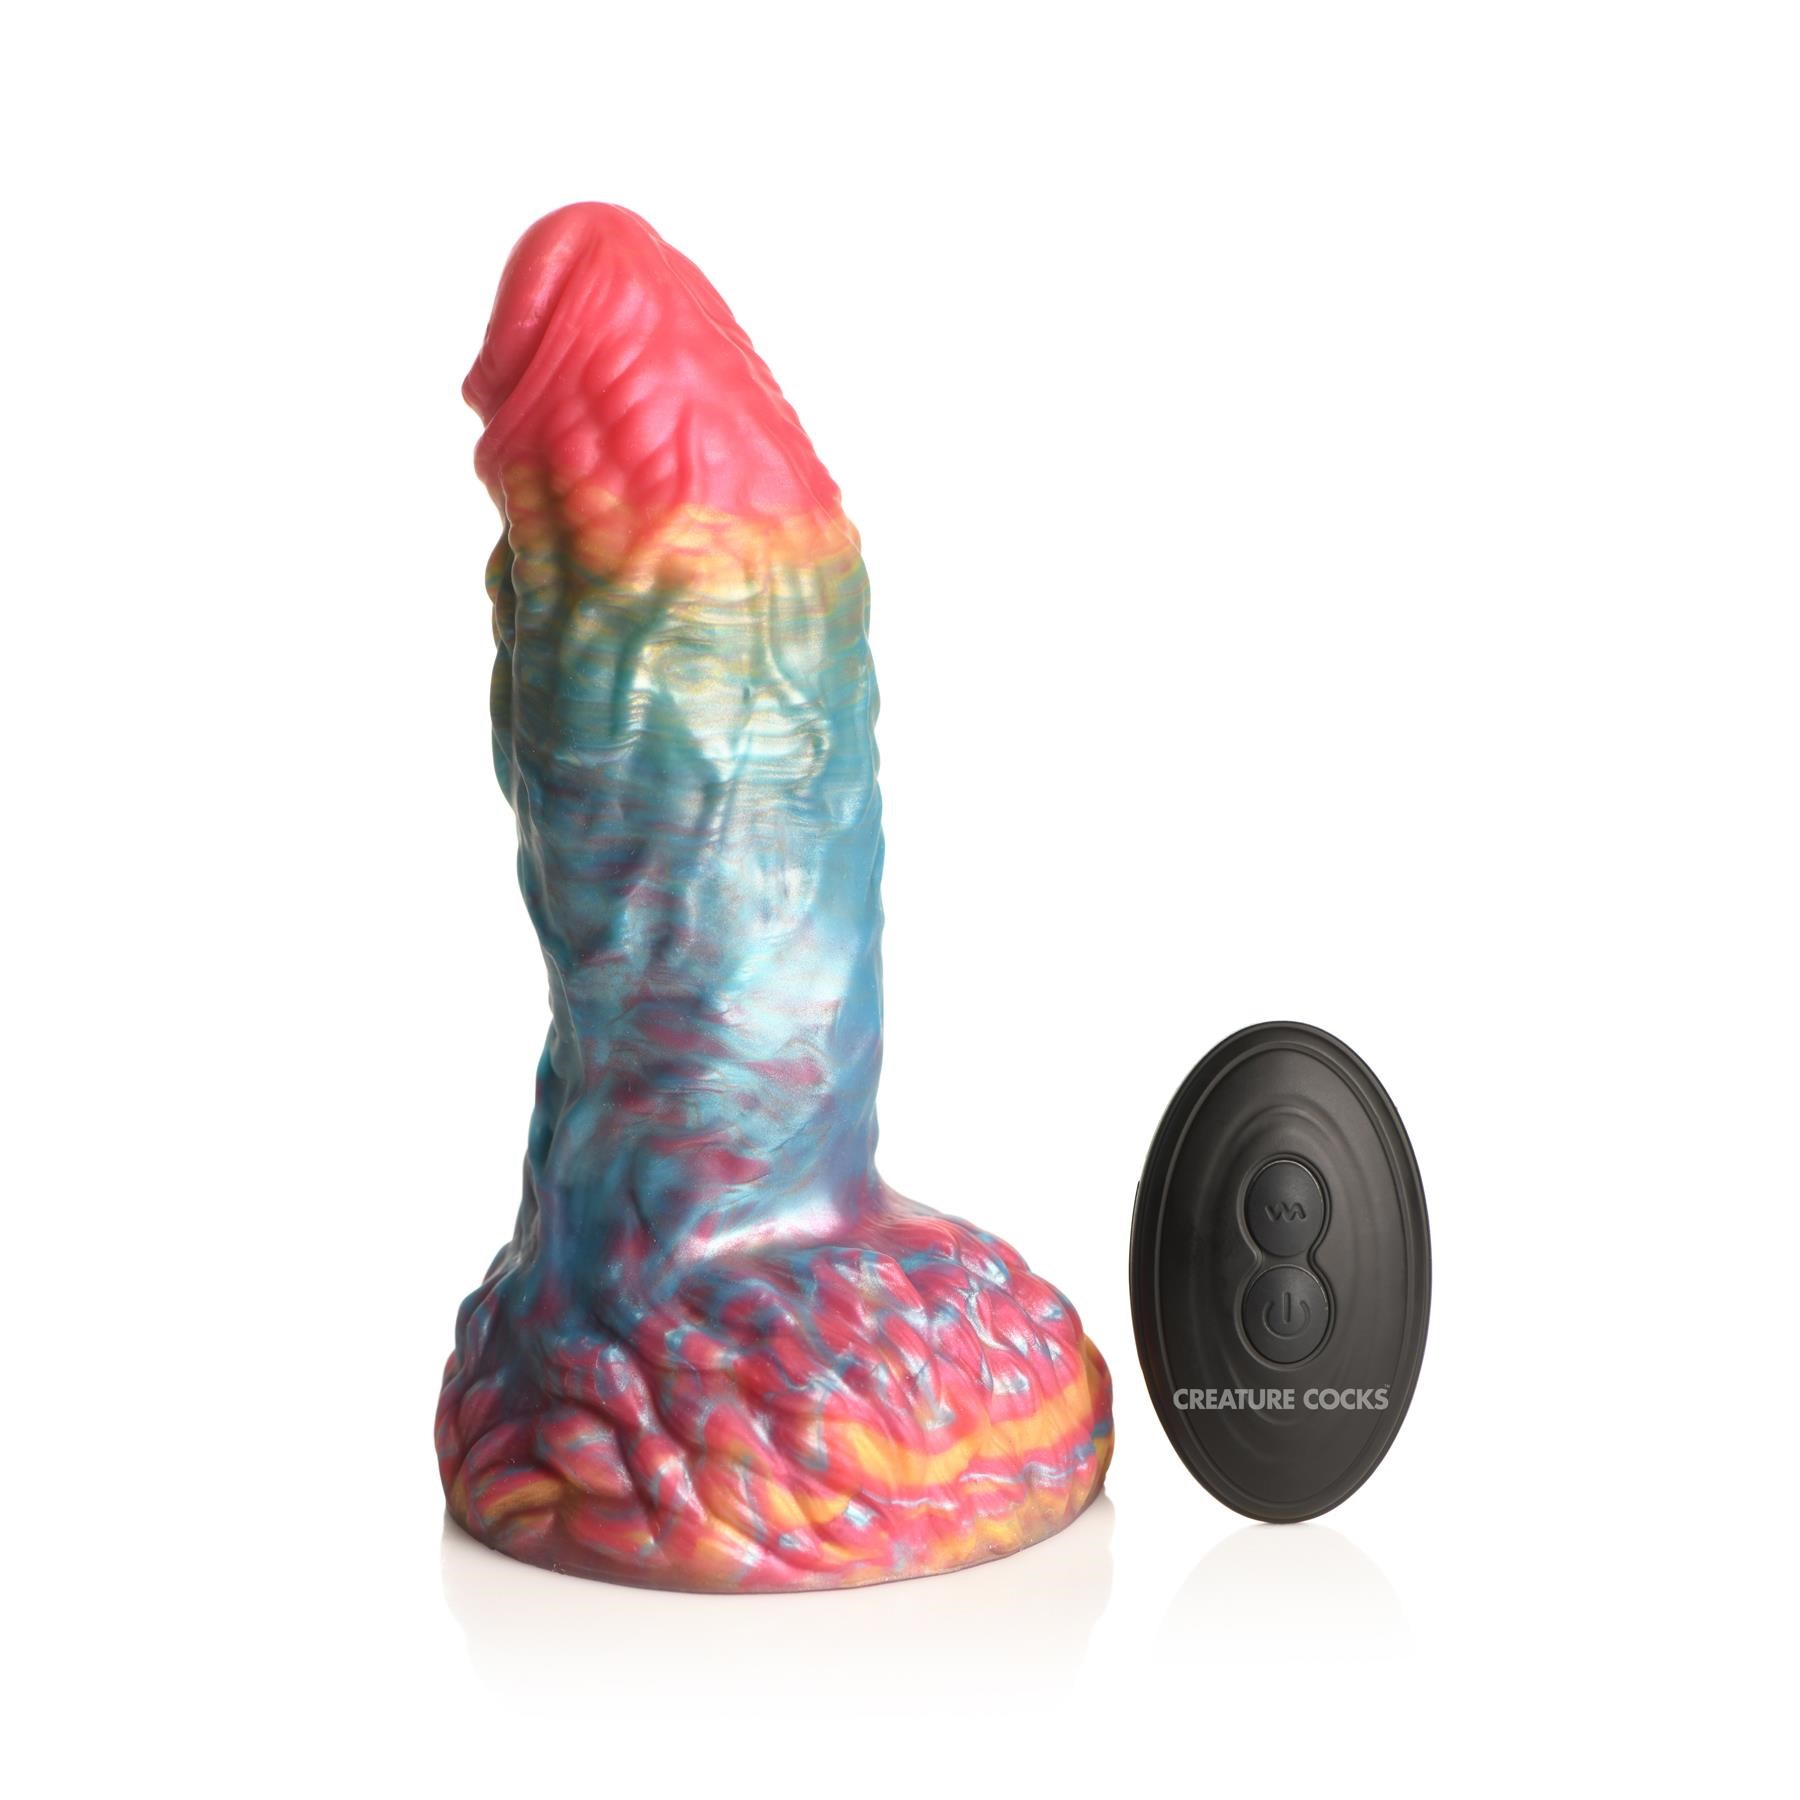 CreatureCocks Rainbow Phoenix Vibrating Dildo with Remote - Product and Remote